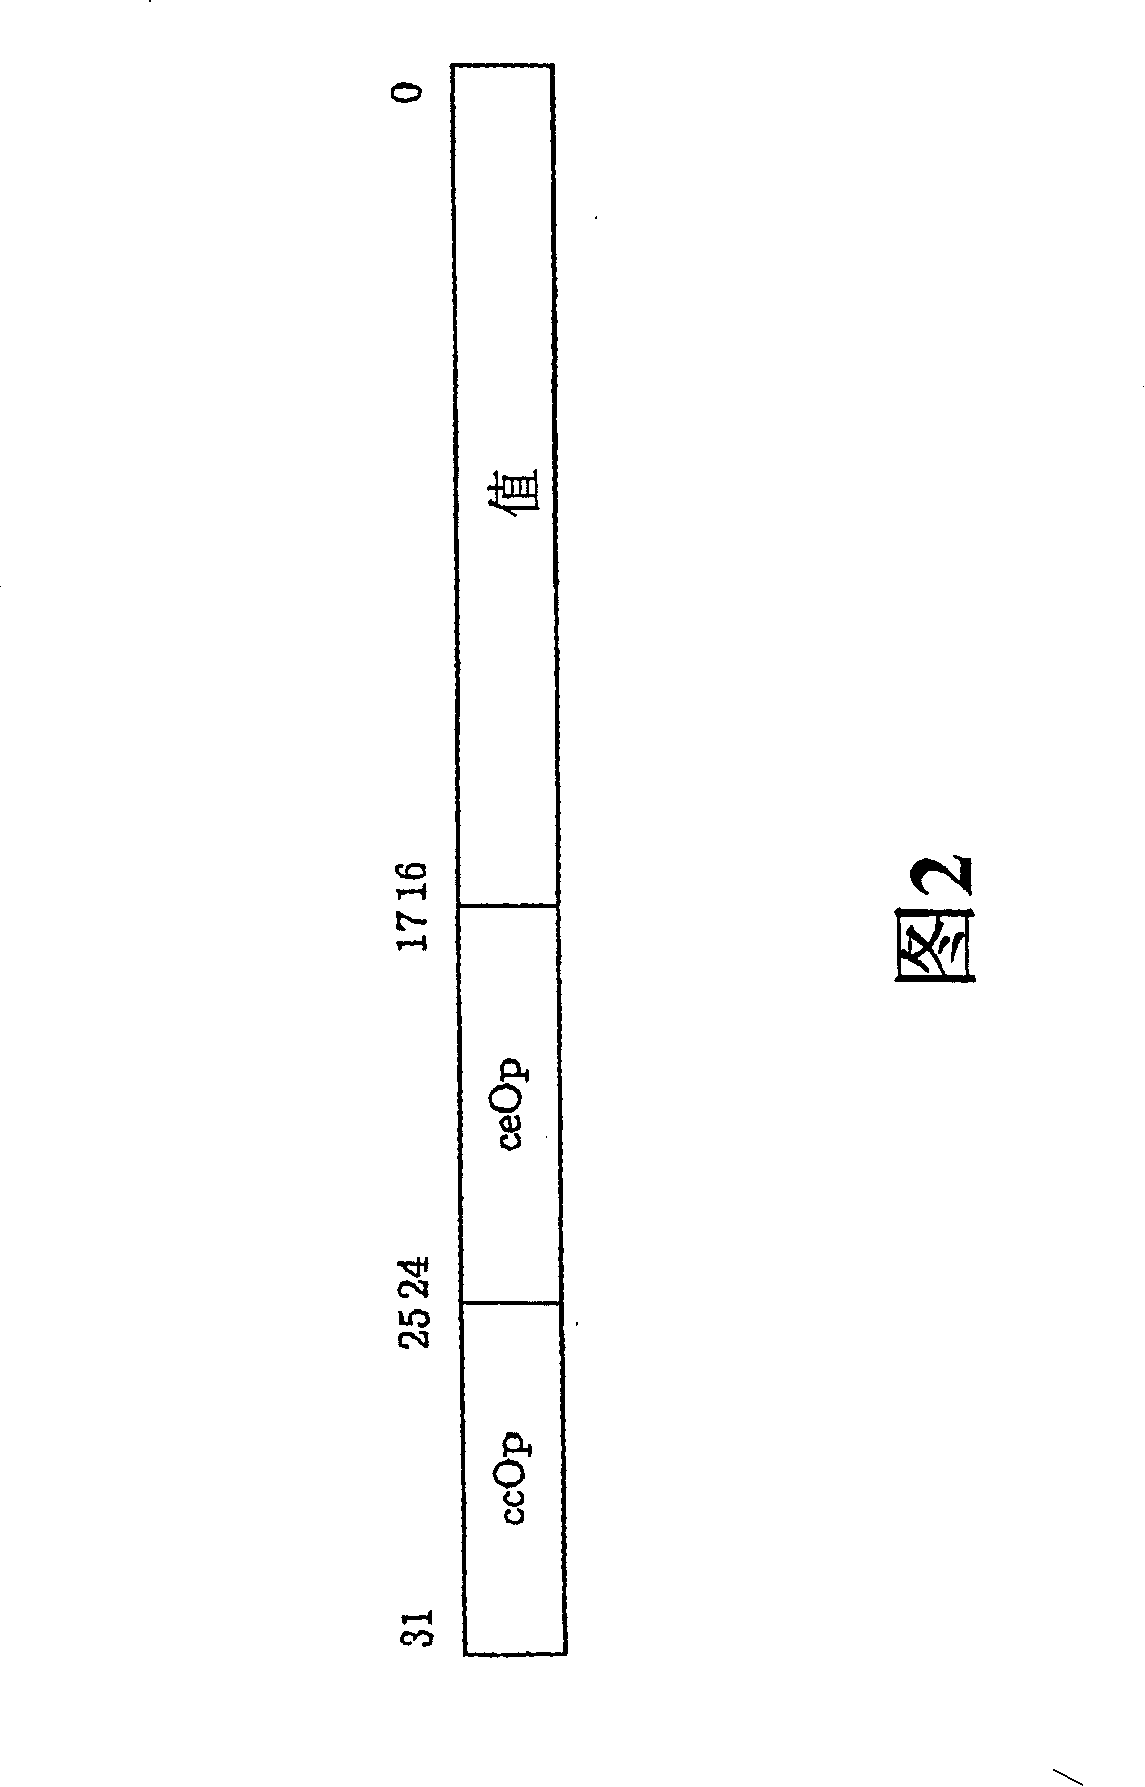 Data processing system having a Cartesian controller, and method for processing data